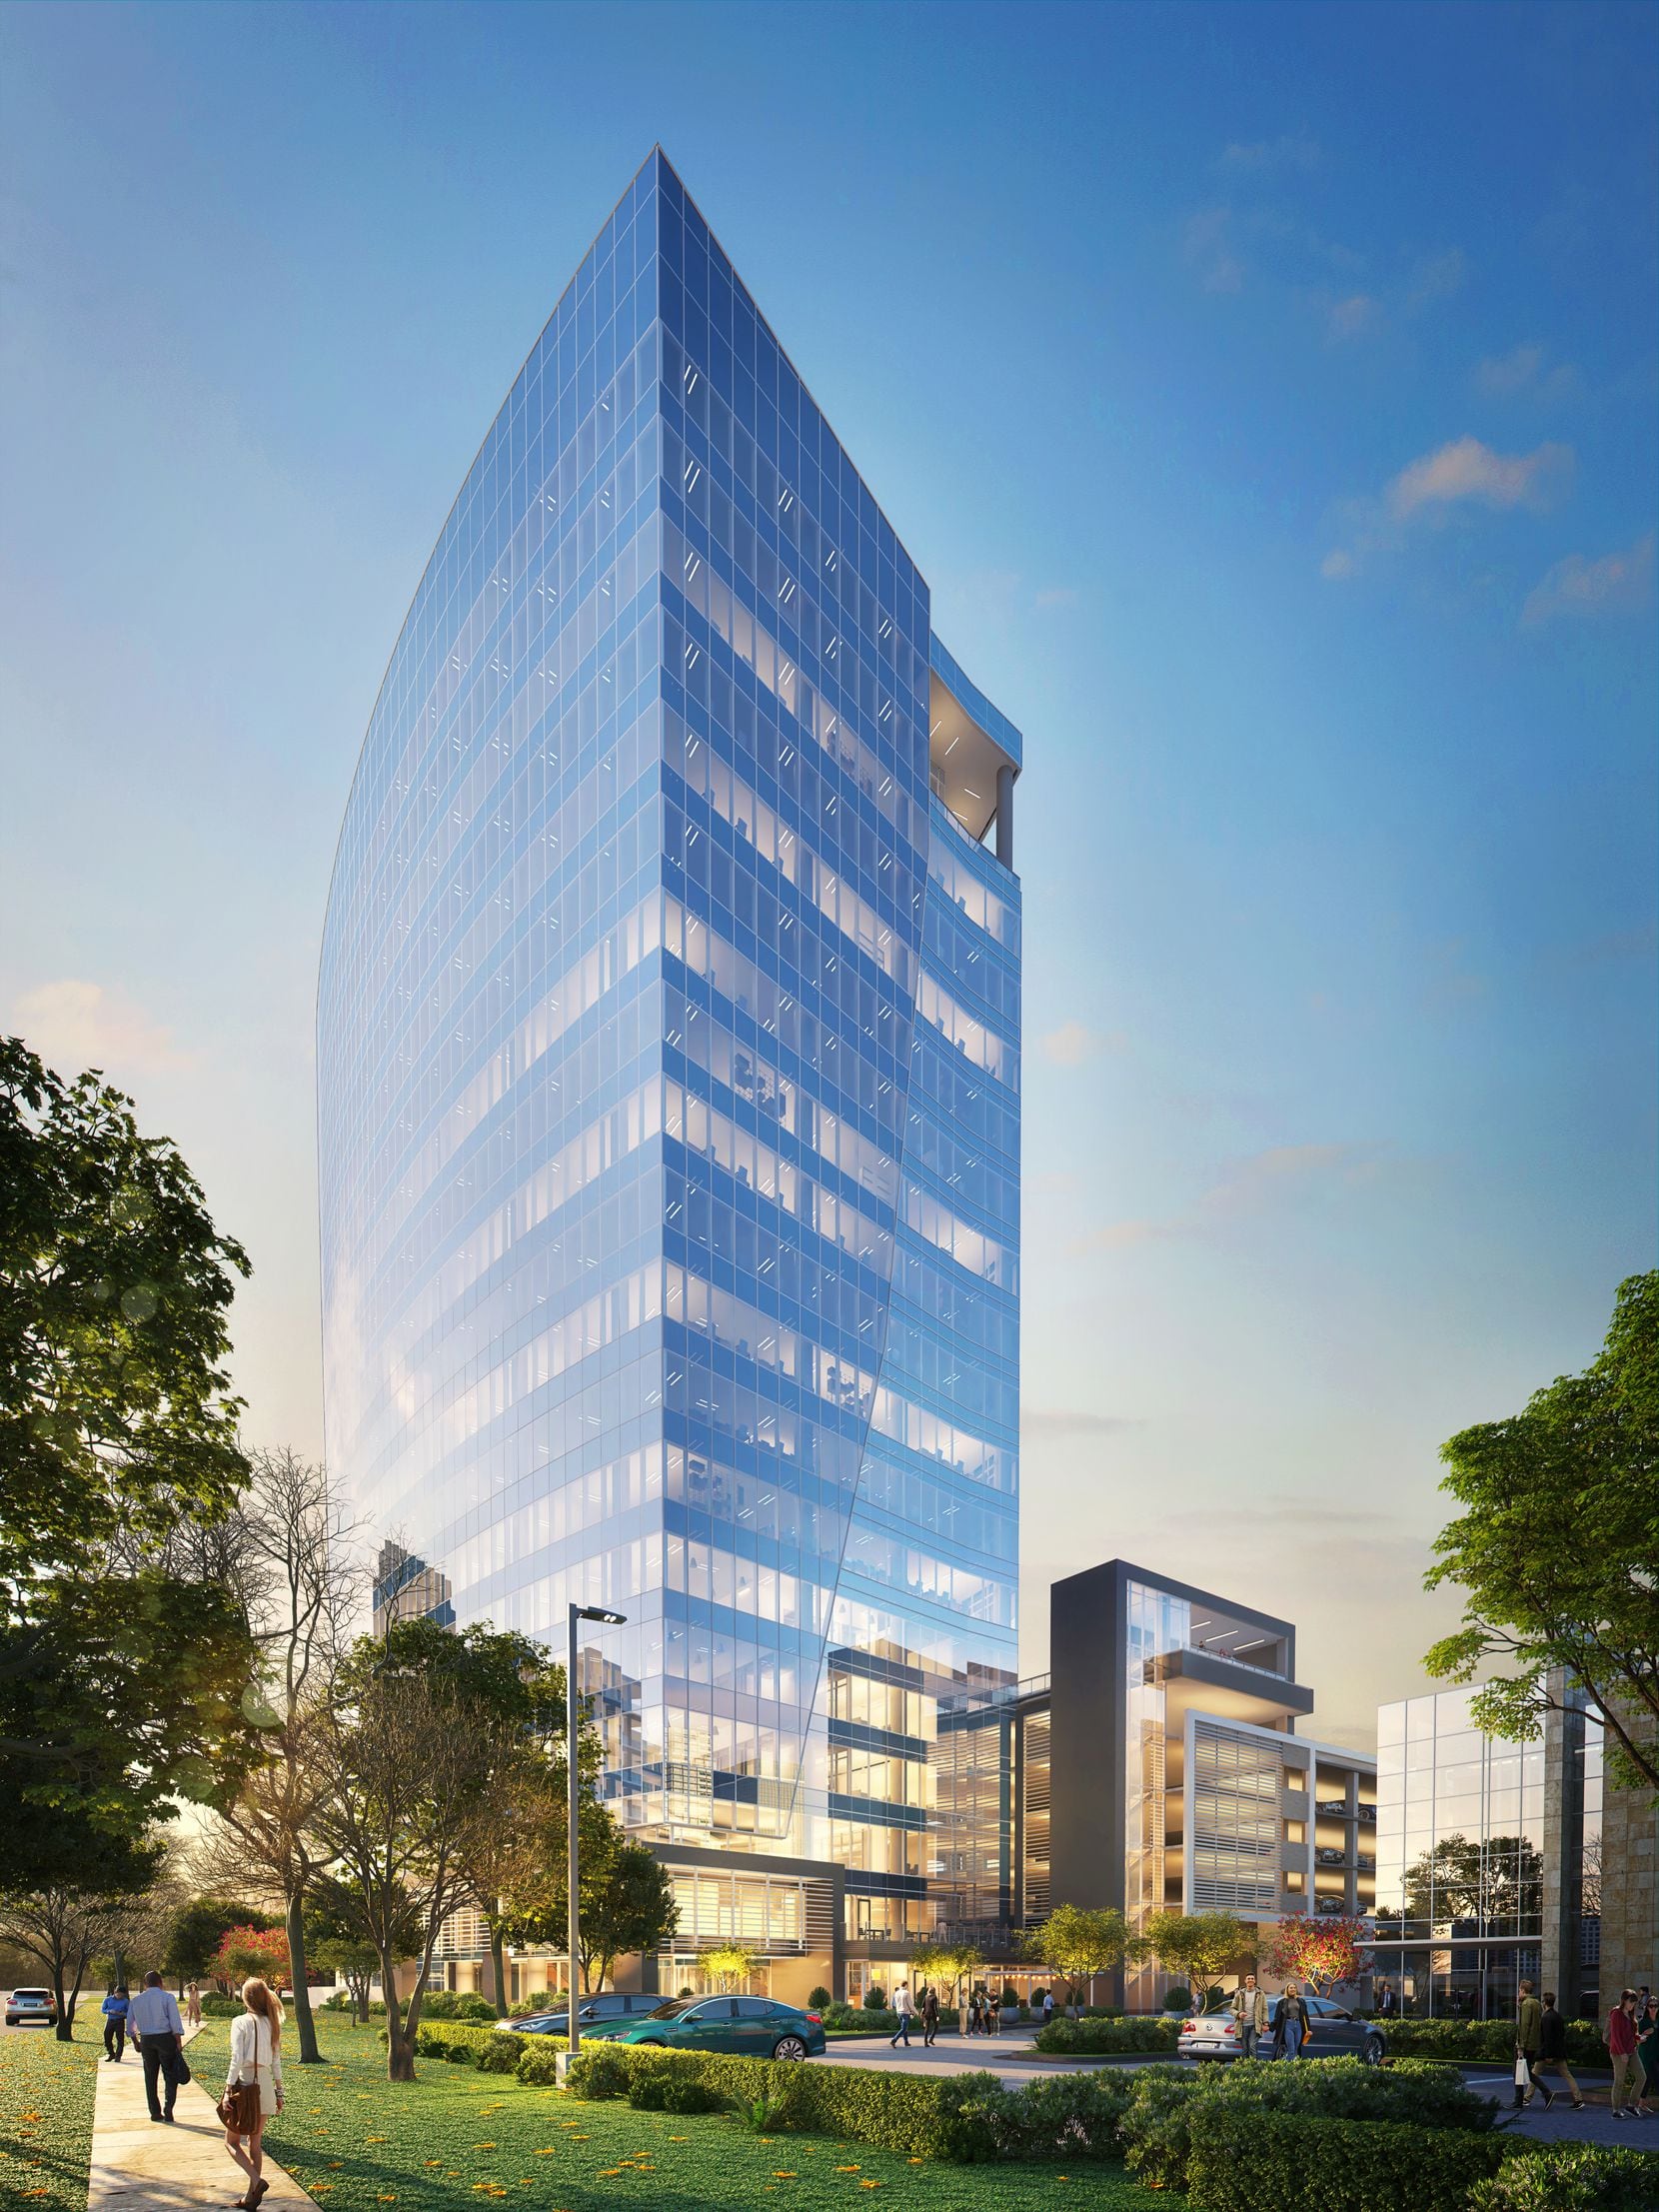 North Carolina property firm bets 0 million on two new Dallas-area towers